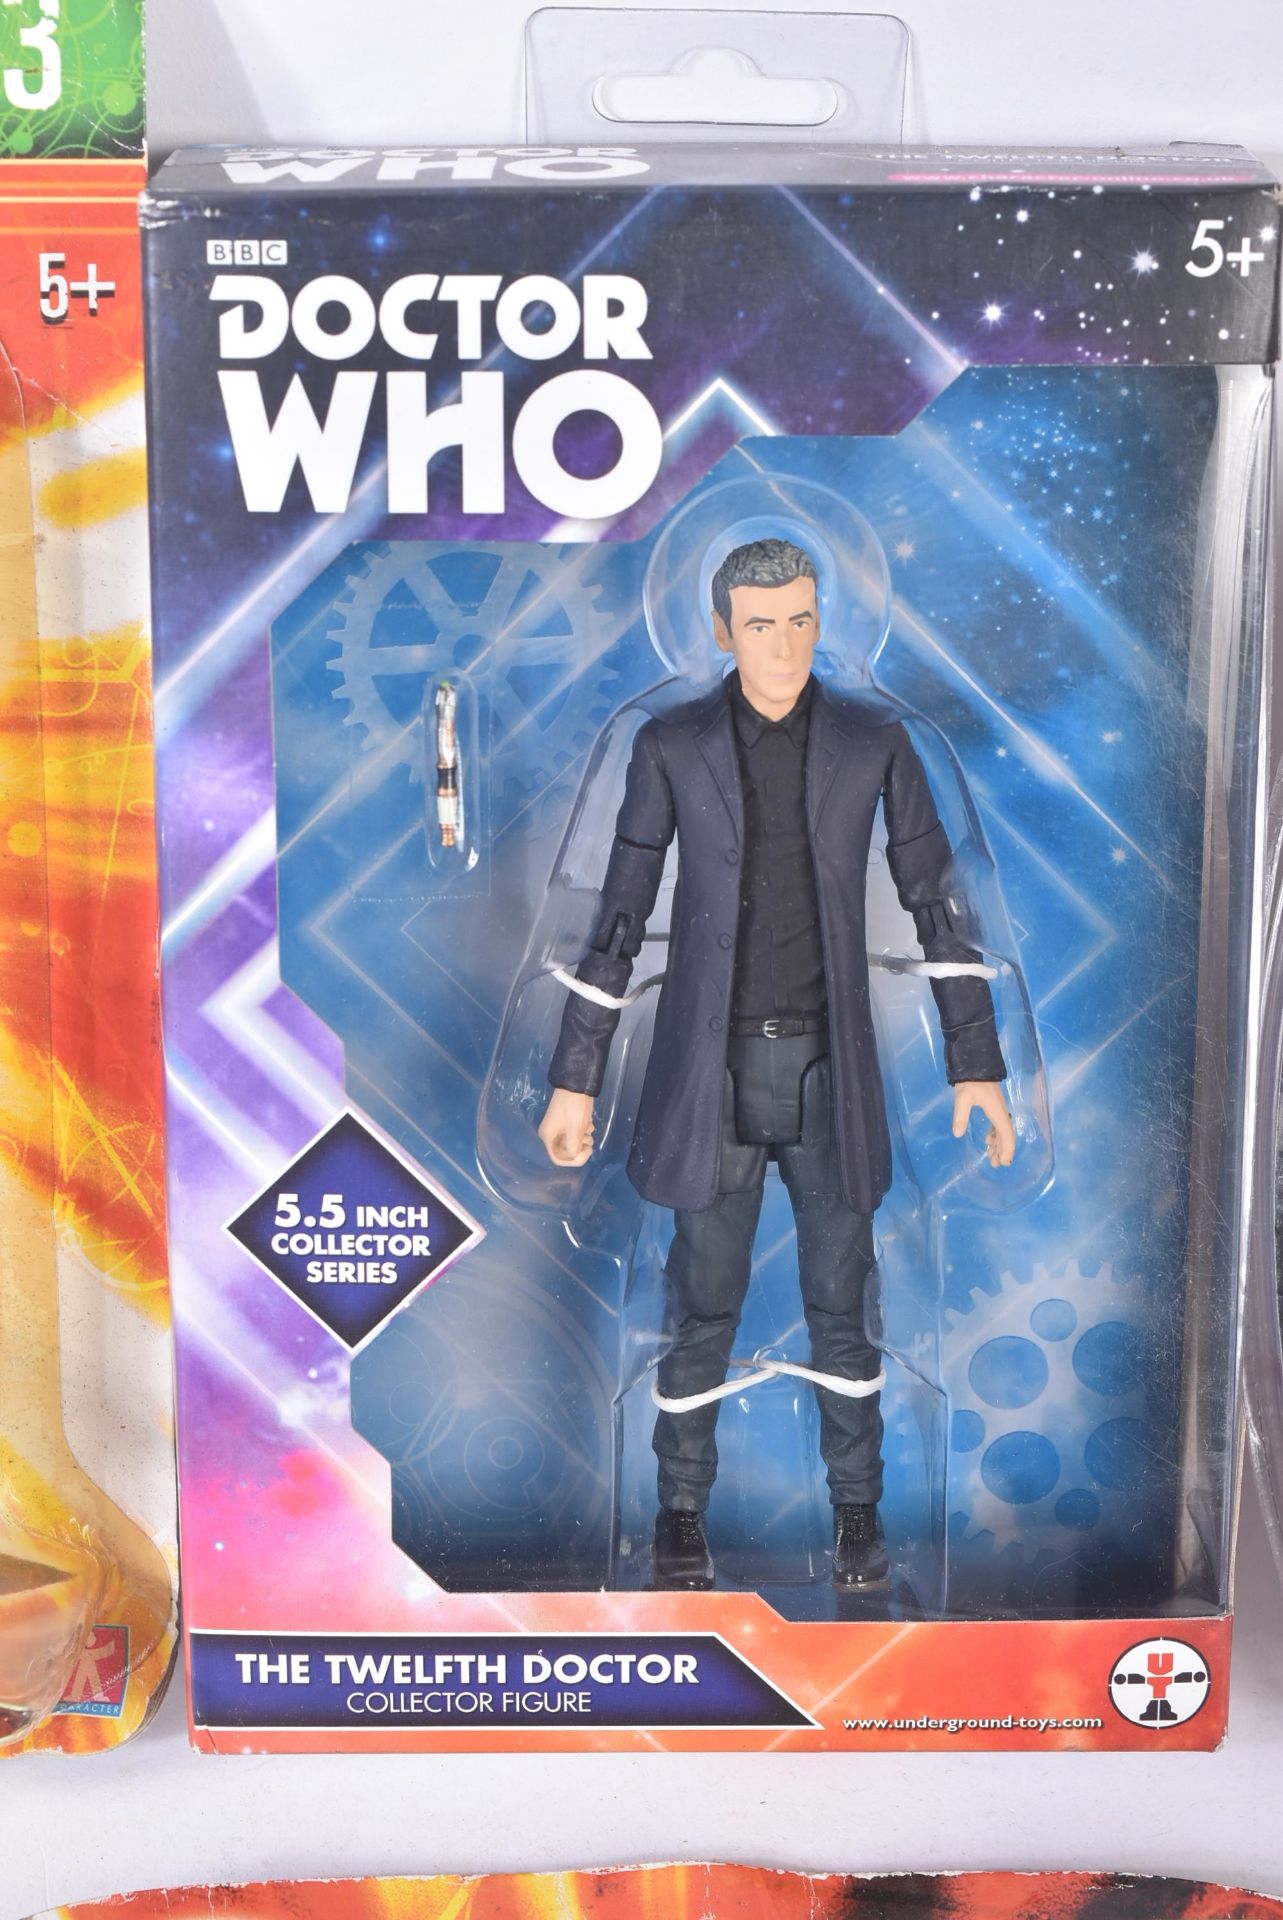 DOCTOR WHO - THE DOCTORS - COLLECTION OF ACTION FIGURES - Image 3 of 6